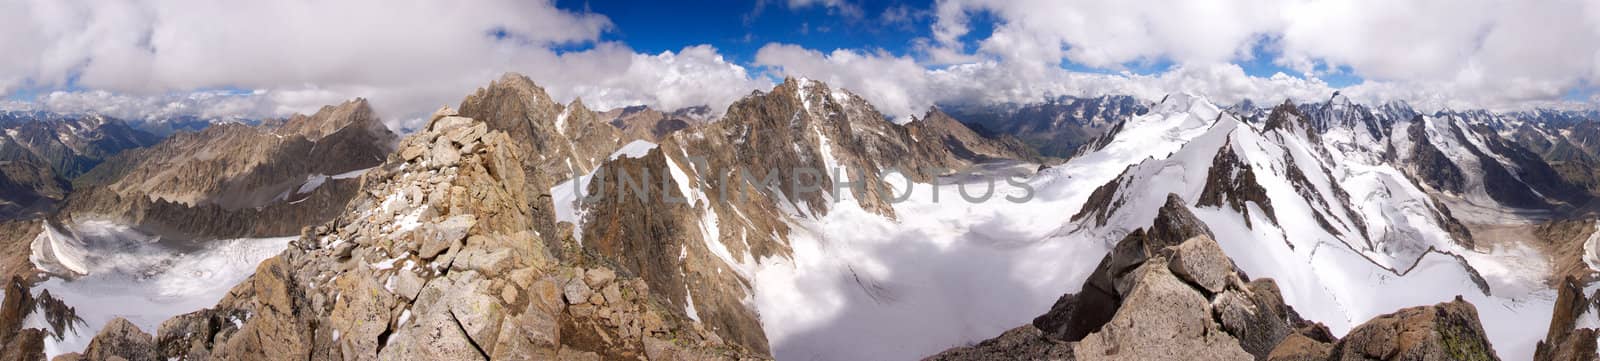 360 degree panorama of the Caucasian mountains from top Kichkidar, Russia